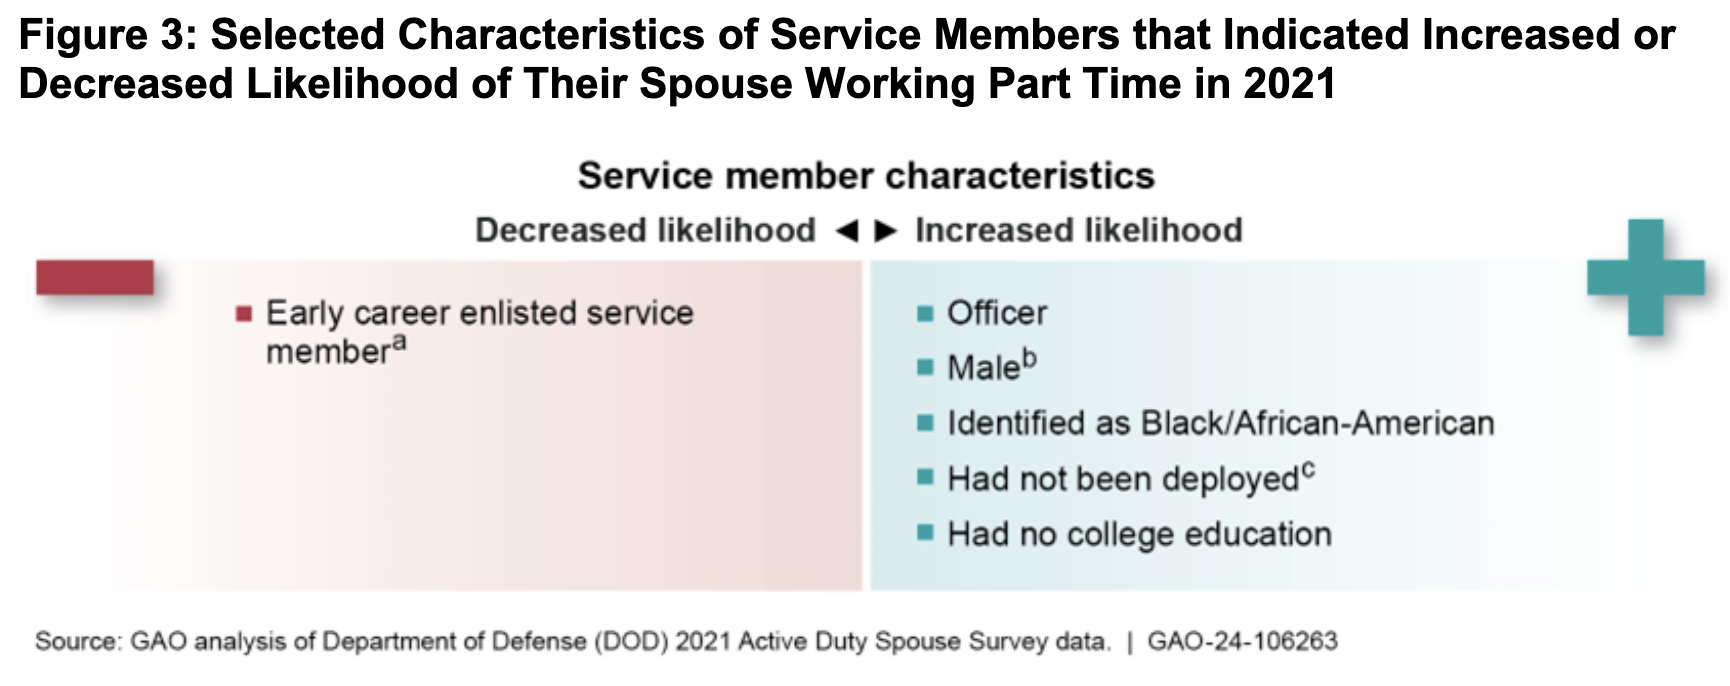 GAO Report | Figure 3: Selected Characteristics of Service Members that Indicated Increased or Decreased Likelihood of Their Spouse Working Part Time in 2021